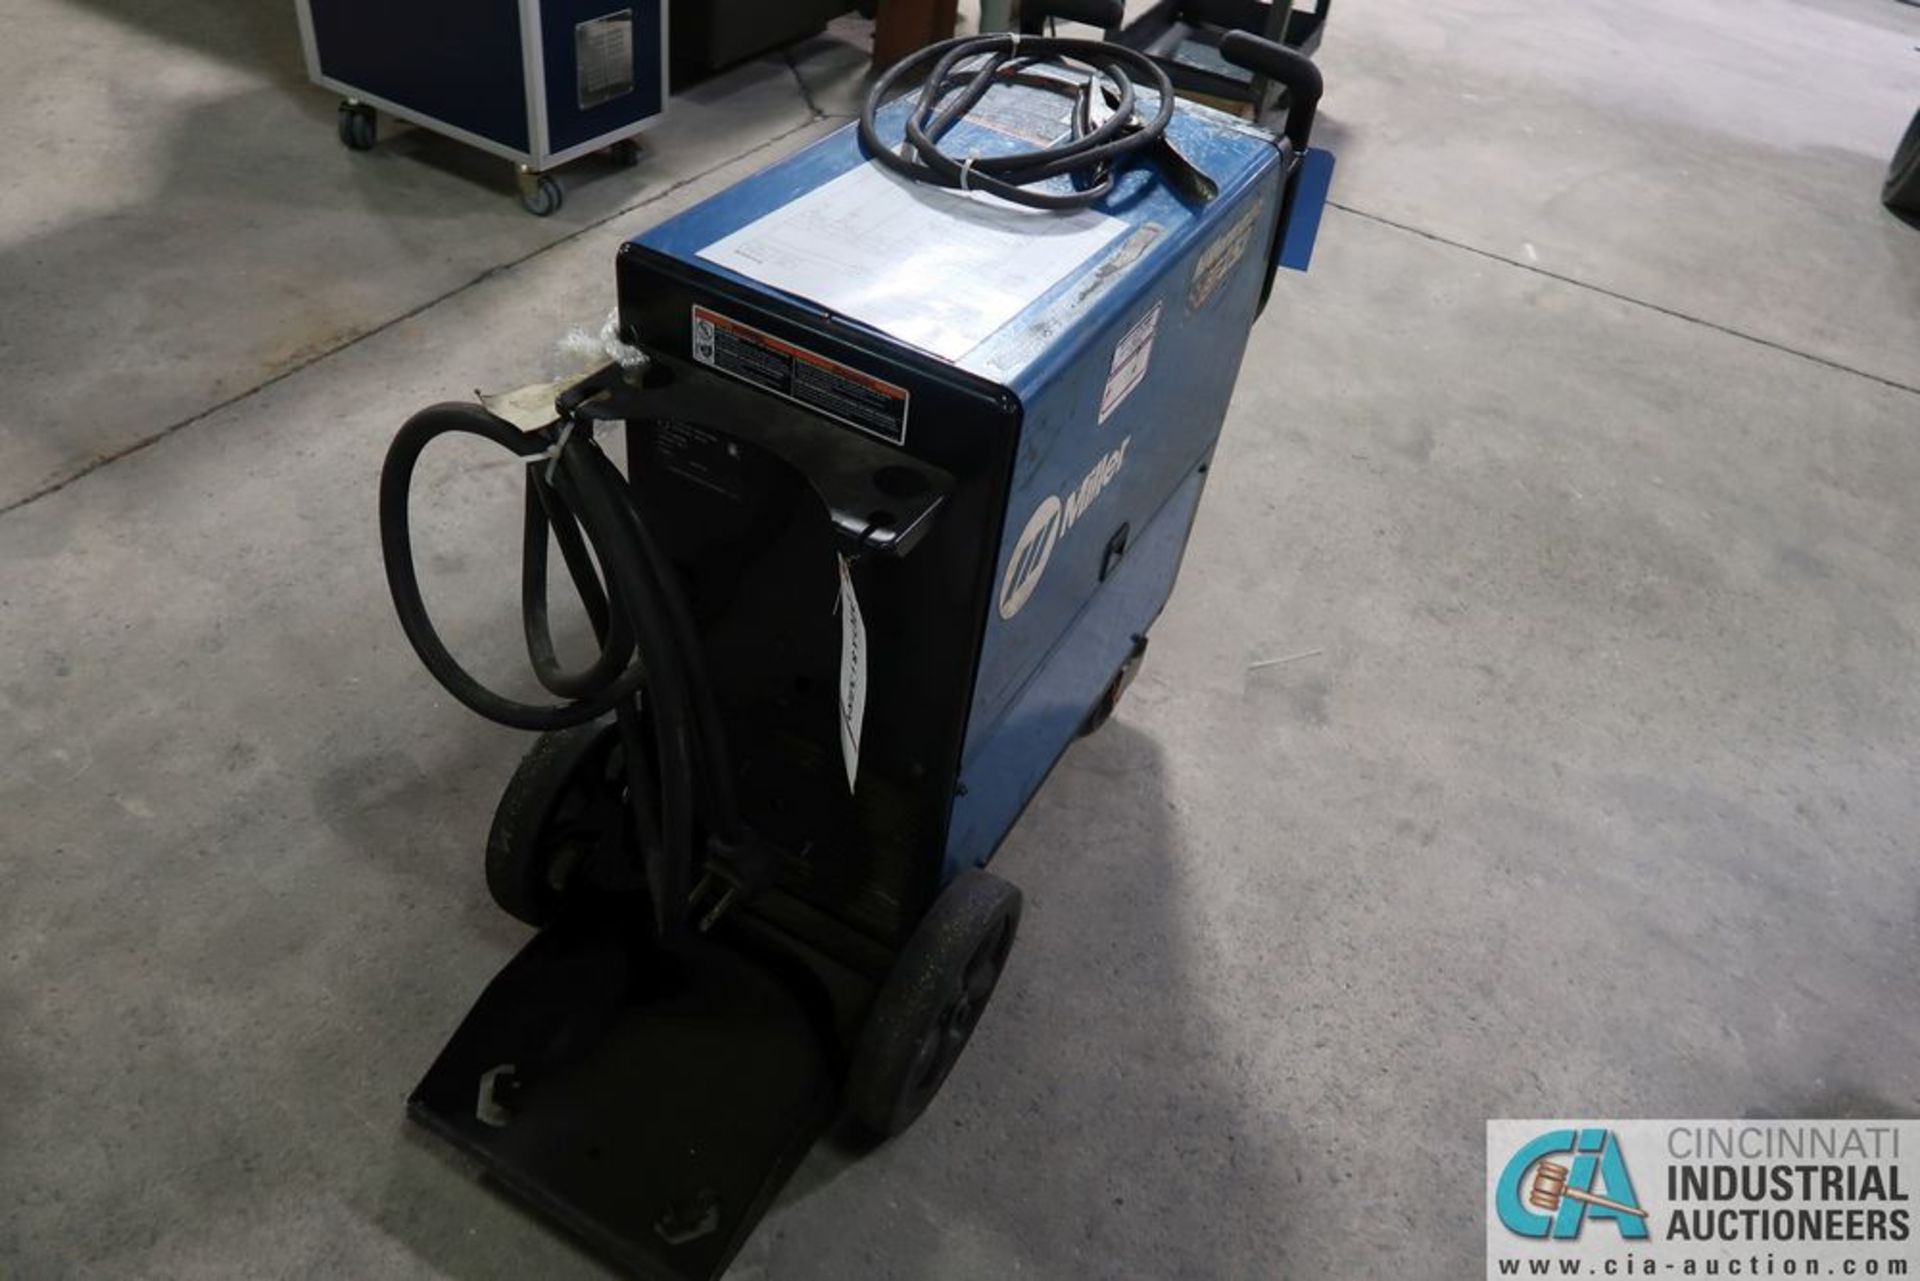 250 AMP MILLER MODEL MILLERMATIC 252 MIG WELDING POWER SOURCE; S/N MD281328N, WITH BUILT-IN WIRE - Image 4 of 7